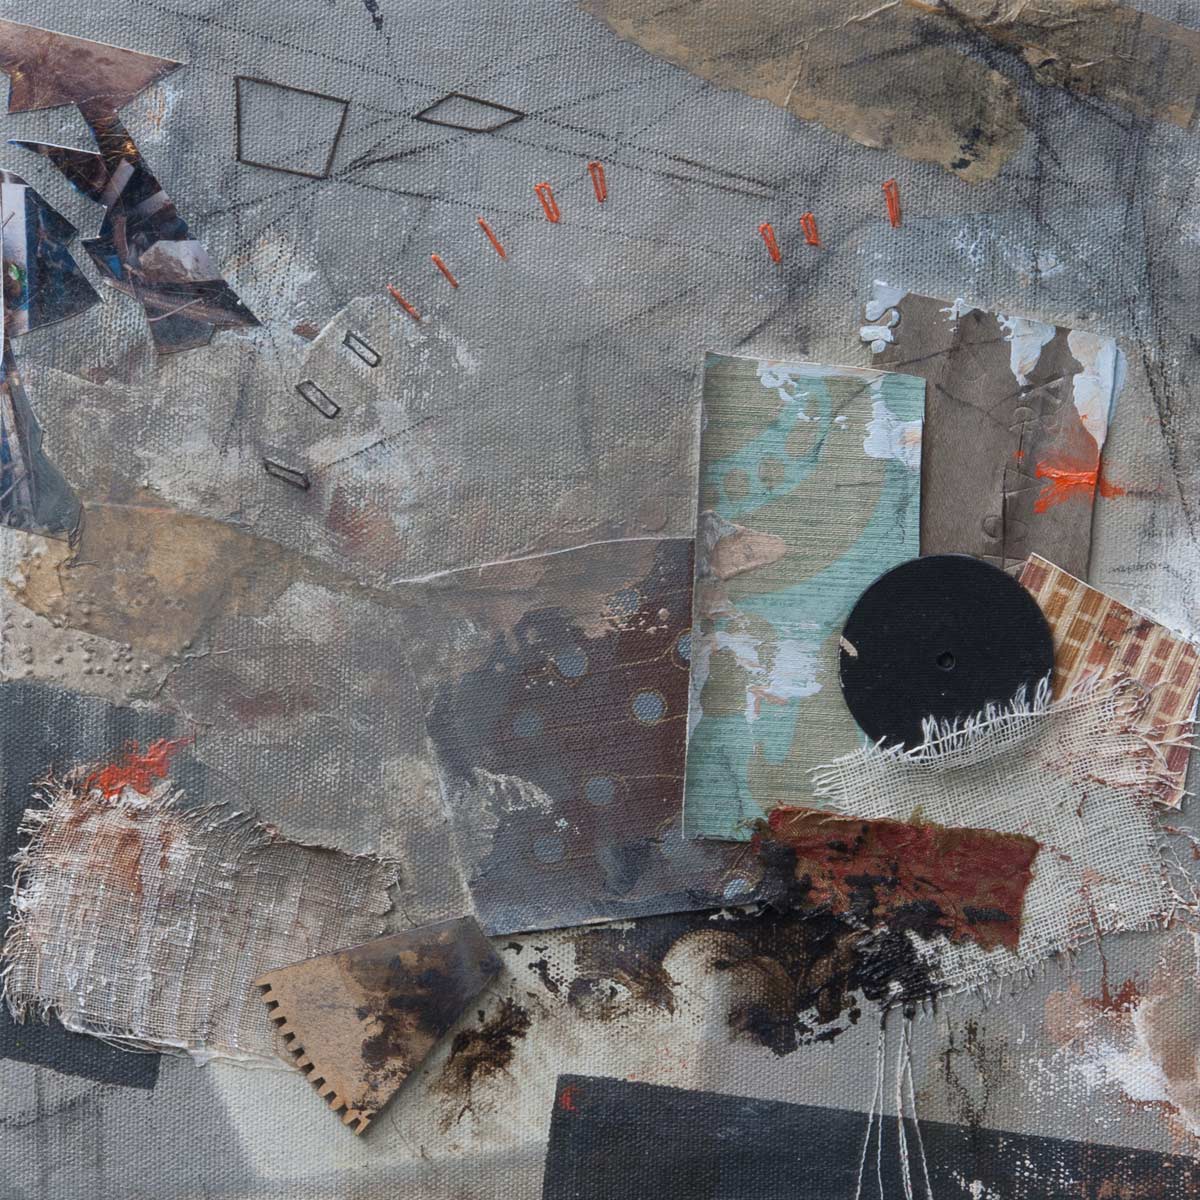 Left in Advance, 2014, mixed media on canvas, 10" x 10", SOLD